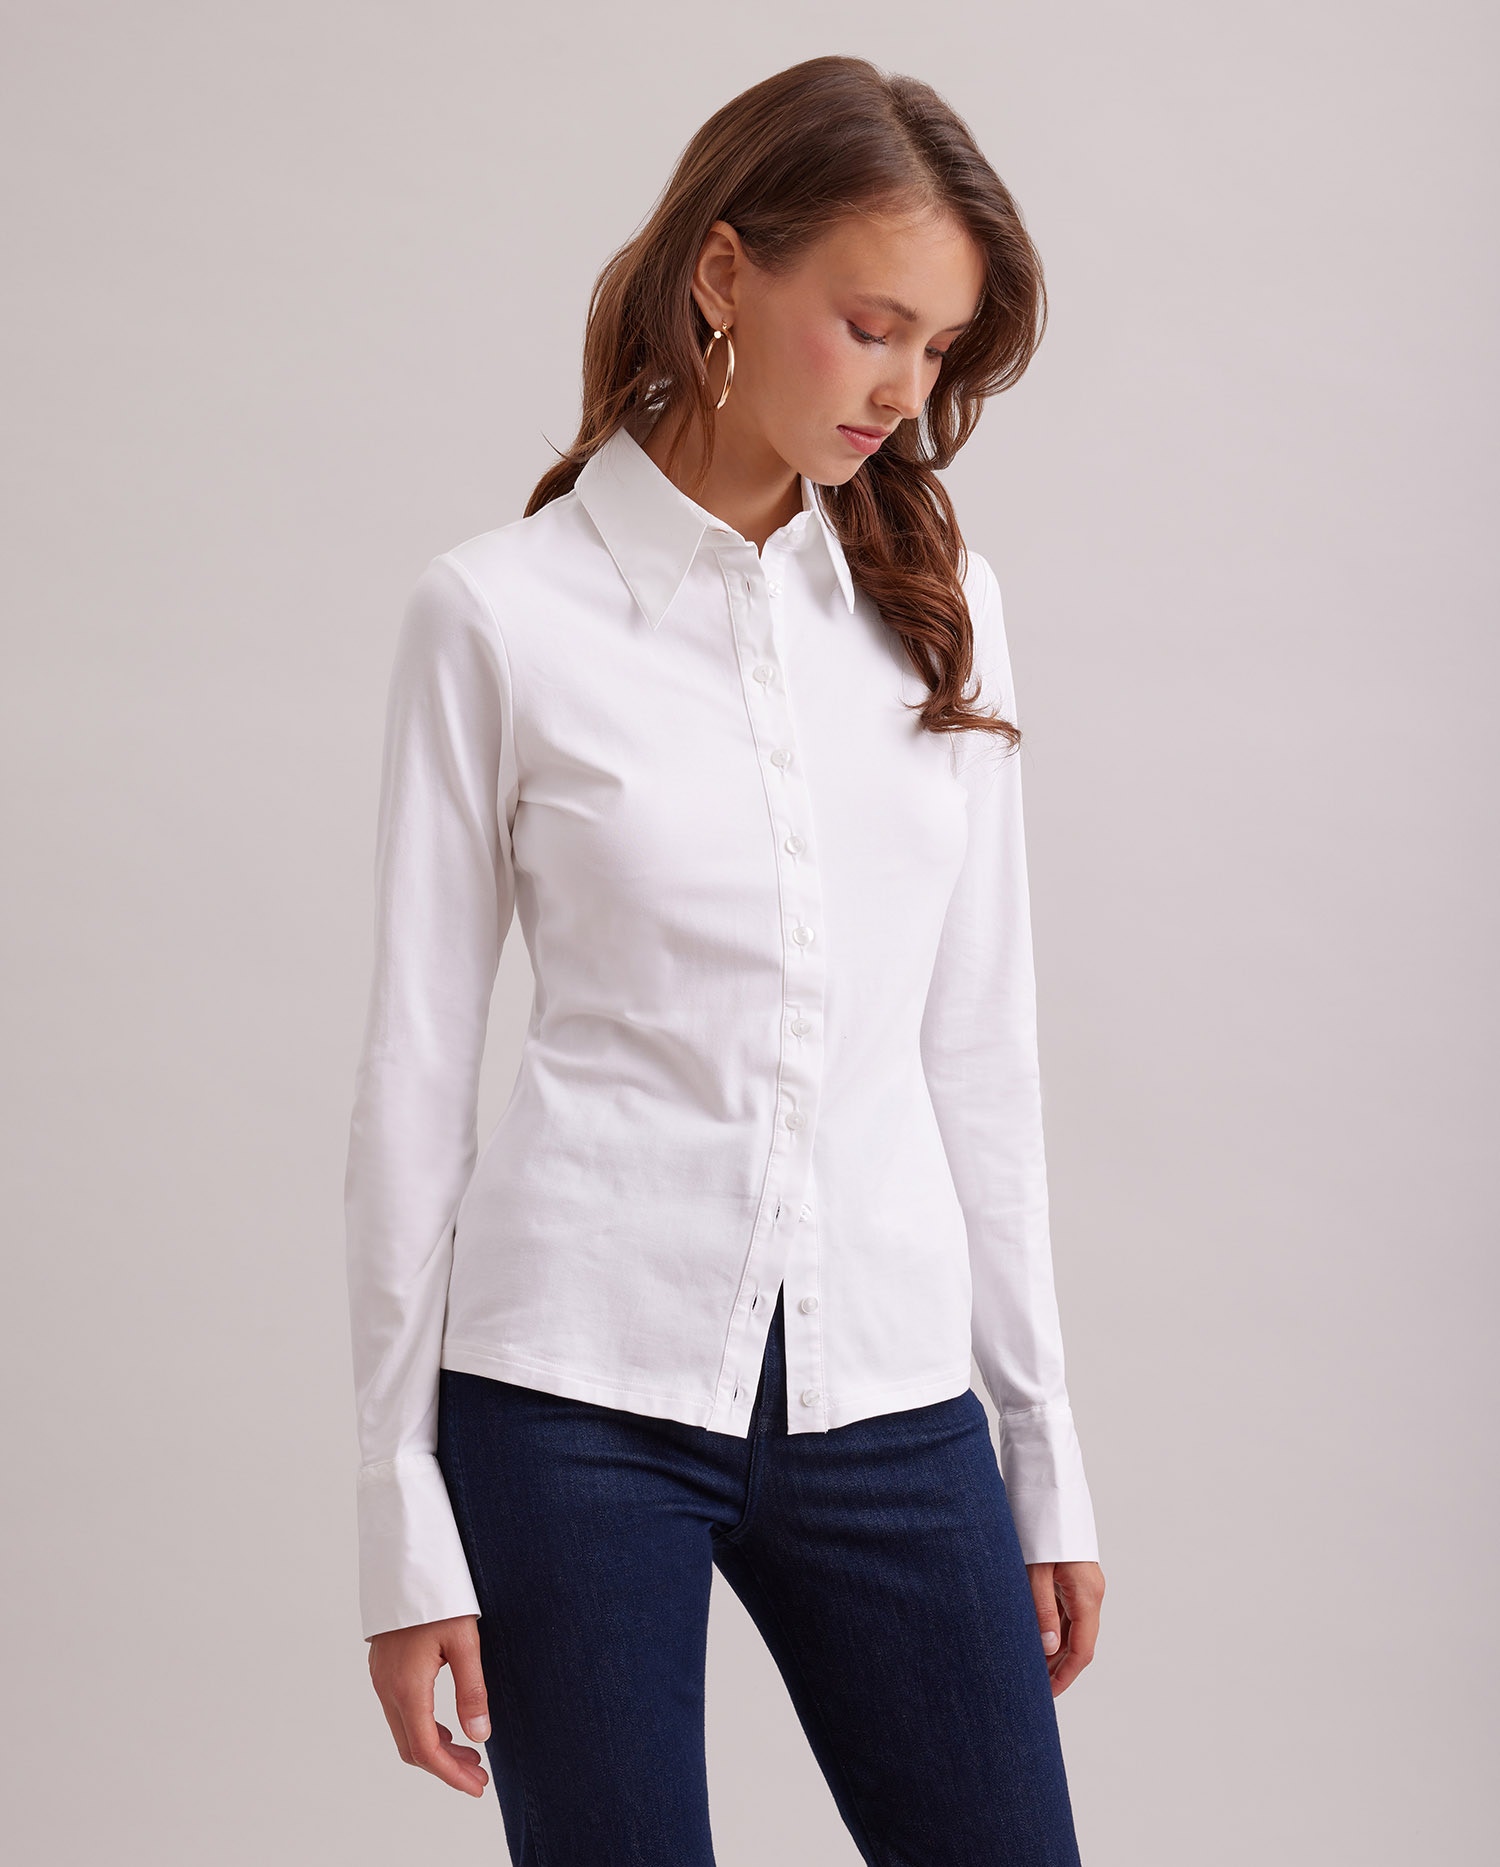 Discover the NUAGE long sleeve jersey shirt in white from ANNE FONTAINE